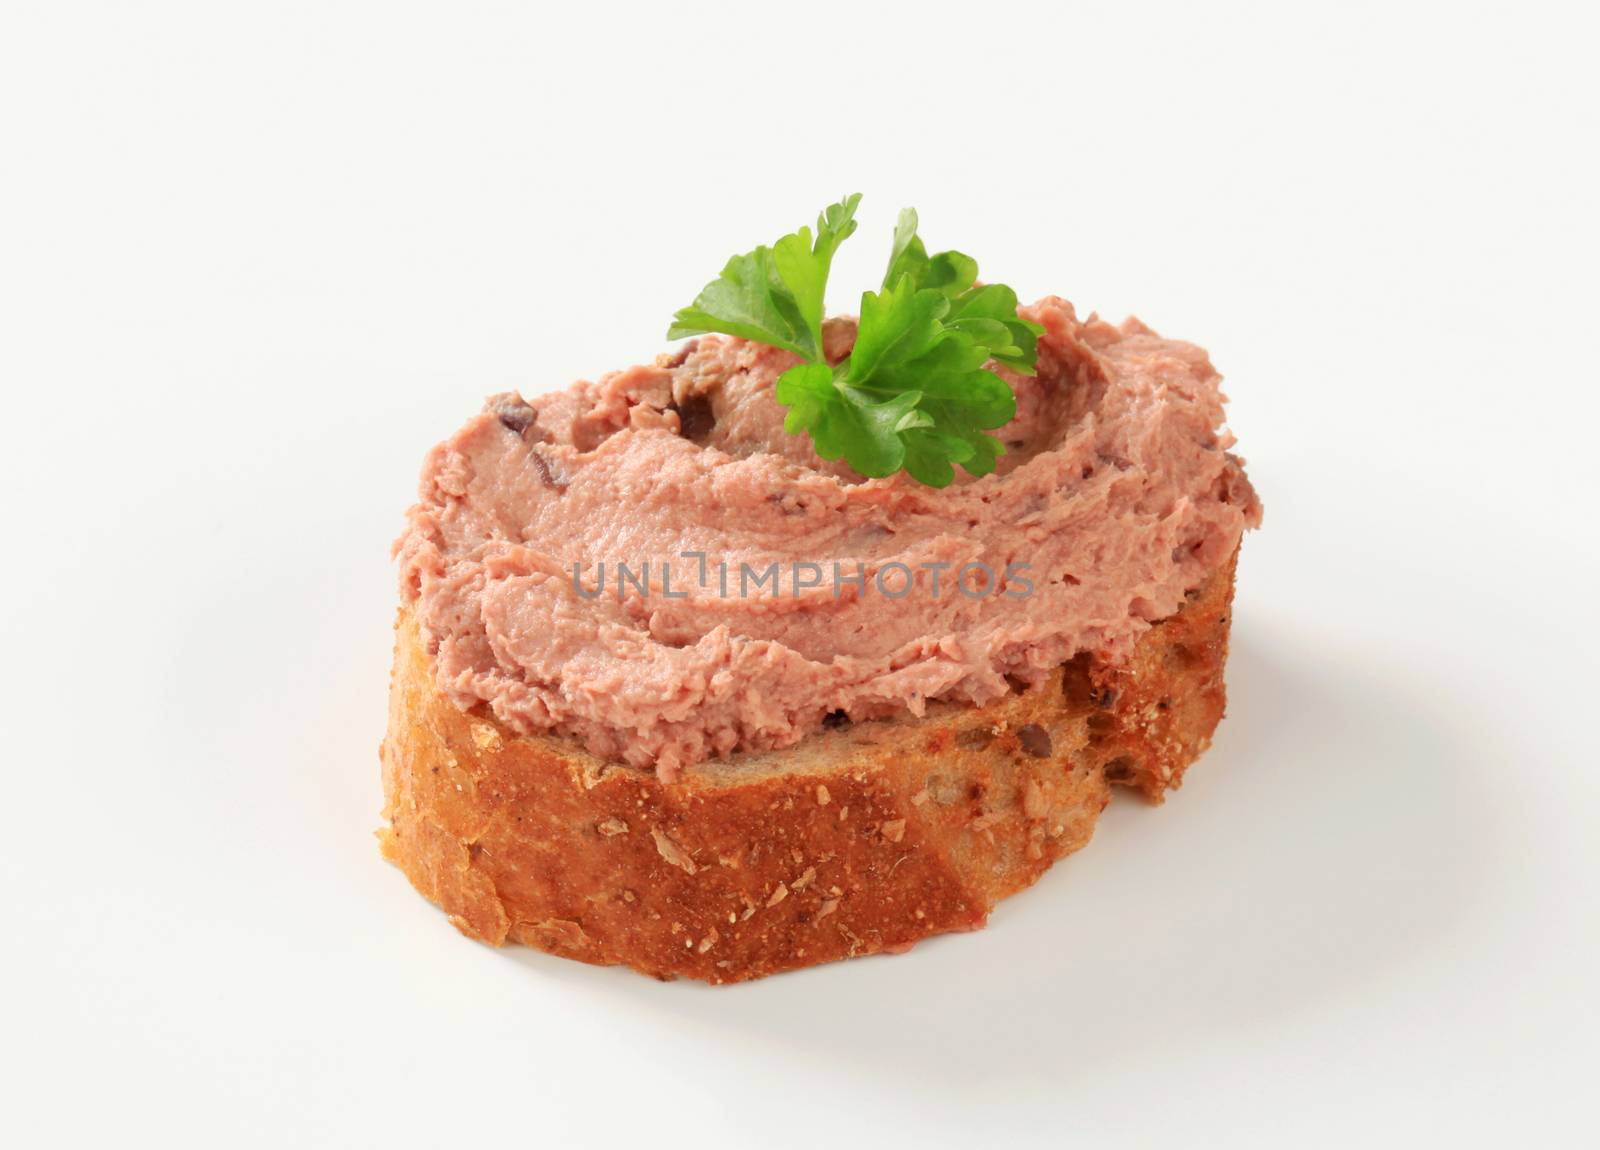 Pate canape by Digifoodstock